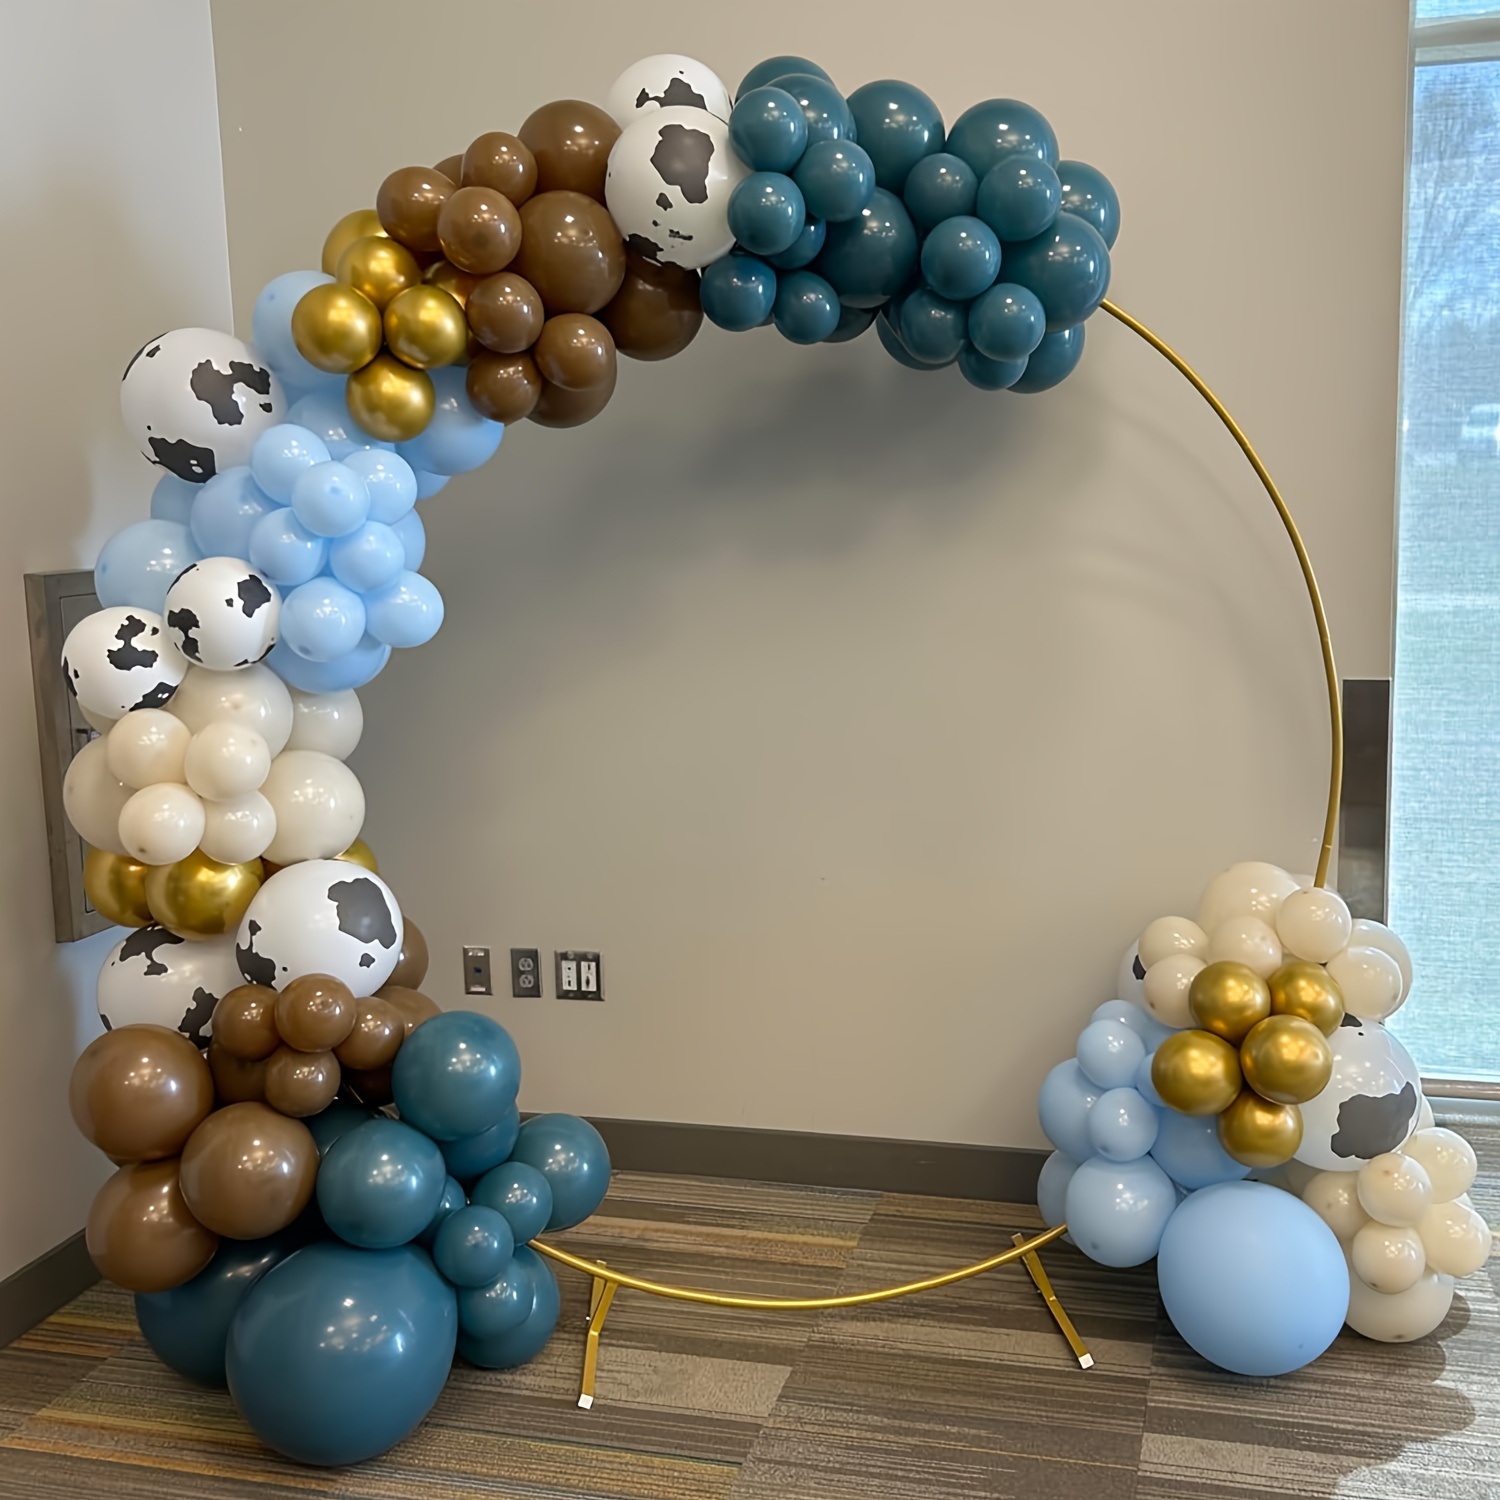 

136pcs, Cowboy Dusty Blue Balloons Arch Garland Kit With, Sand White Coffee Cow Print Farm Animal Gold Balloons For Baby Shower Western Cowboy Theme Party Supplies Decorations